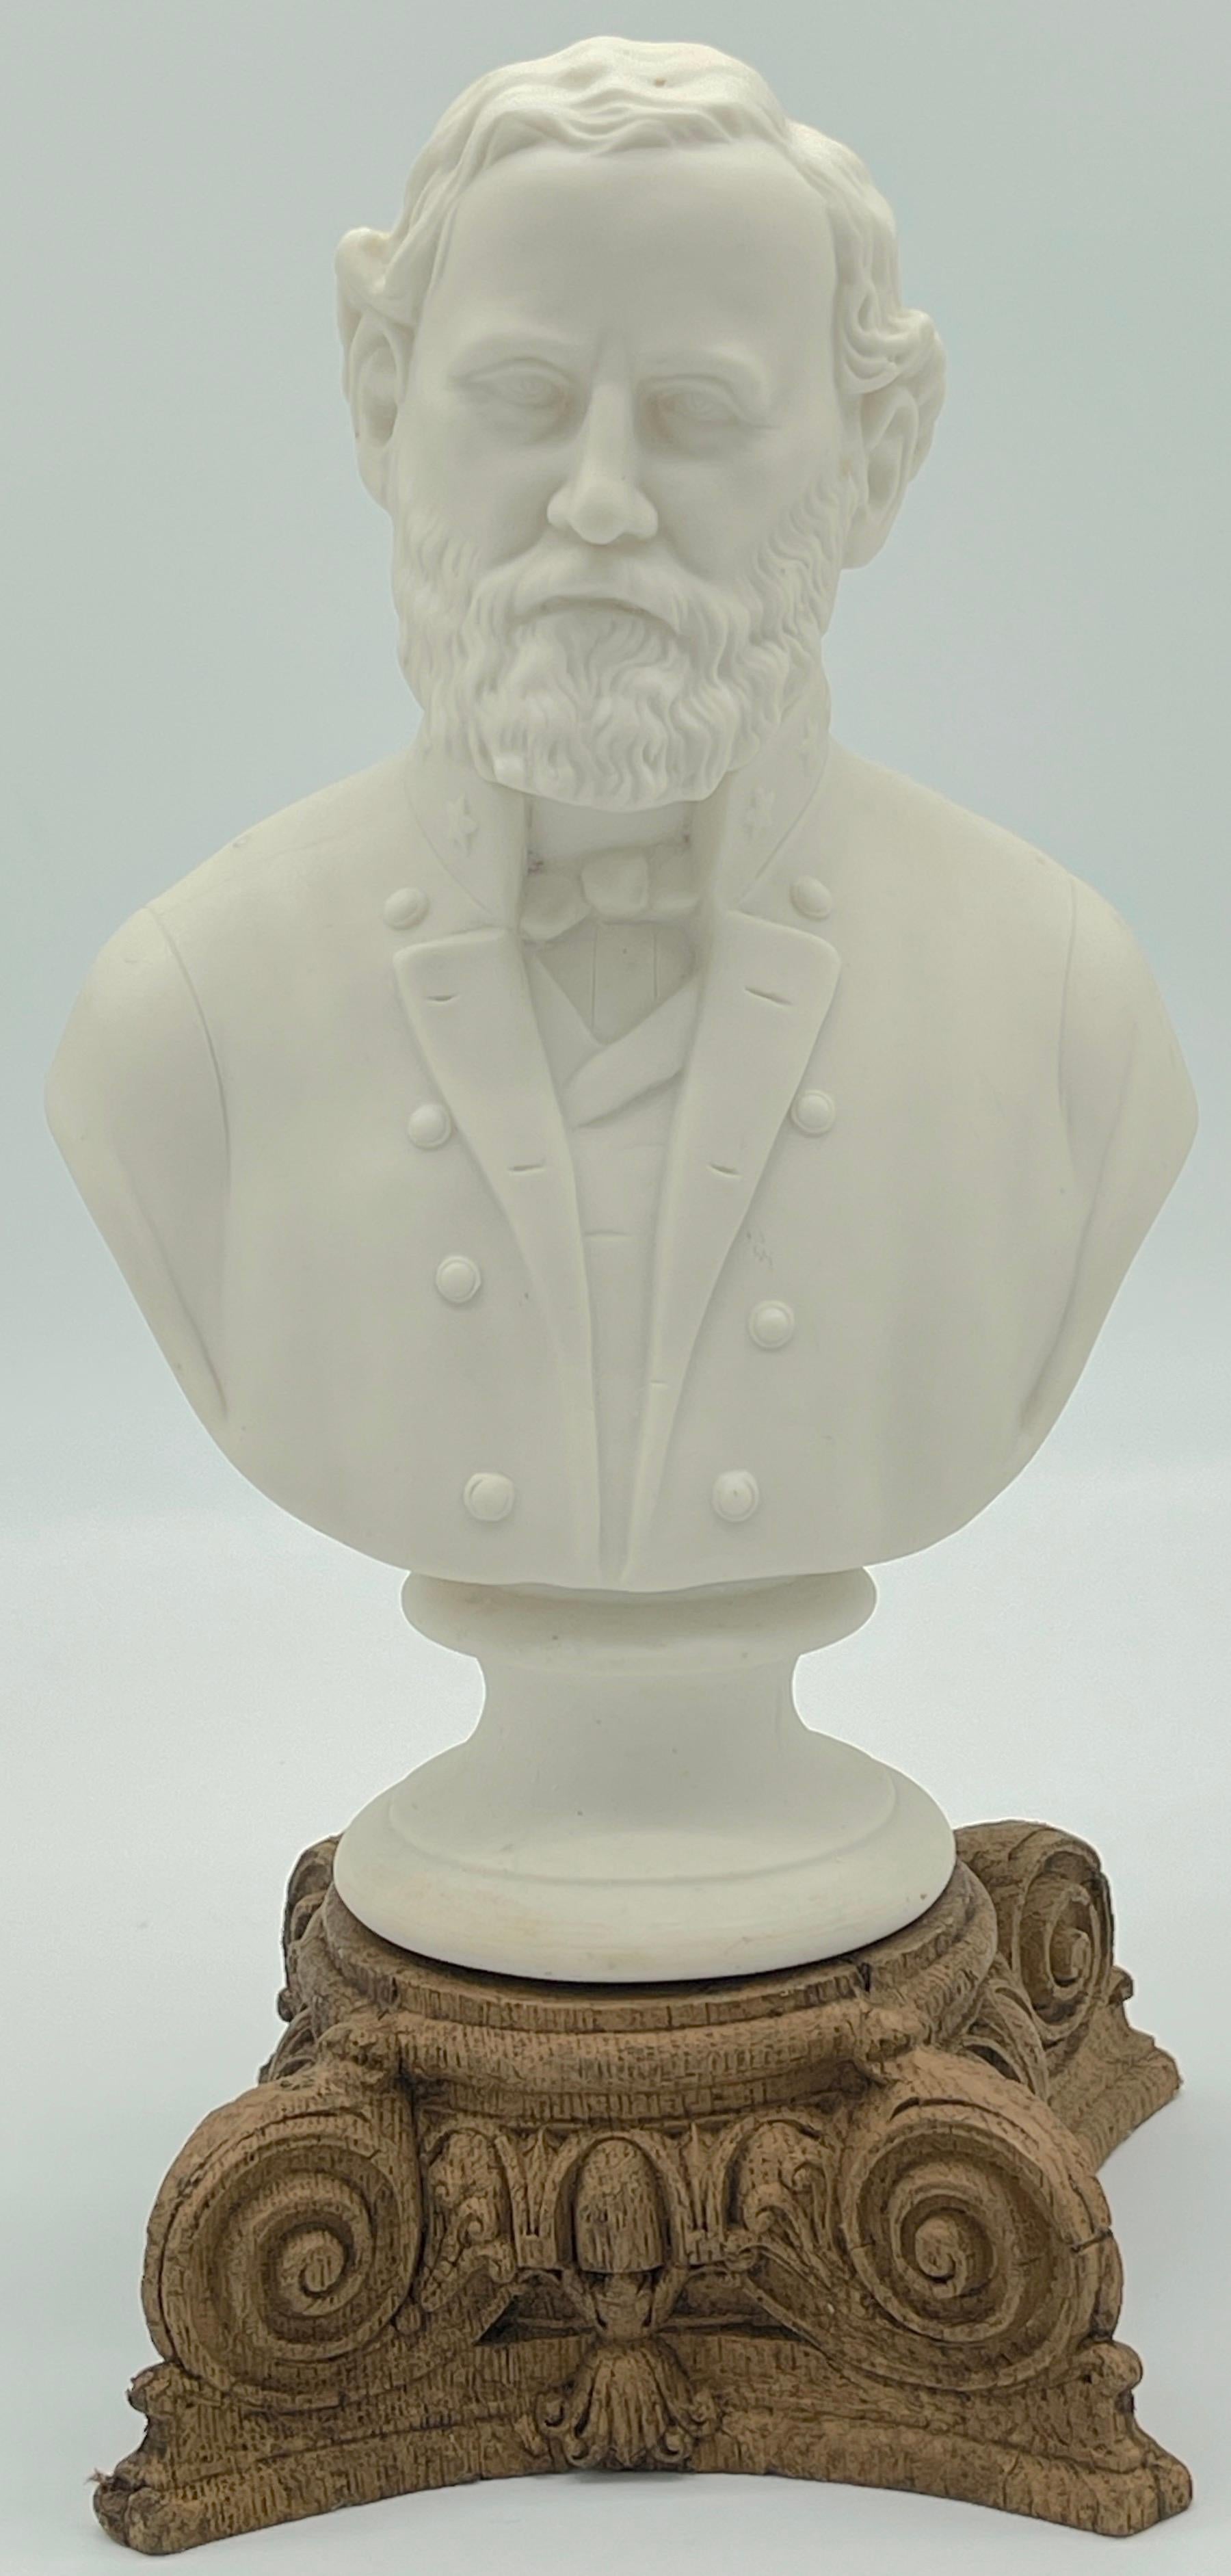 Sculpture Bust of Confederate General Robert E. Lee
Porcelain (Parian), 14” high, on carved wood neoclassical base
Inscribed “General Lee/by Morris/J&TB 401.” 
Made by James and Thomas Bevington, Hanley, England; 1863-1876

This sculpture of the